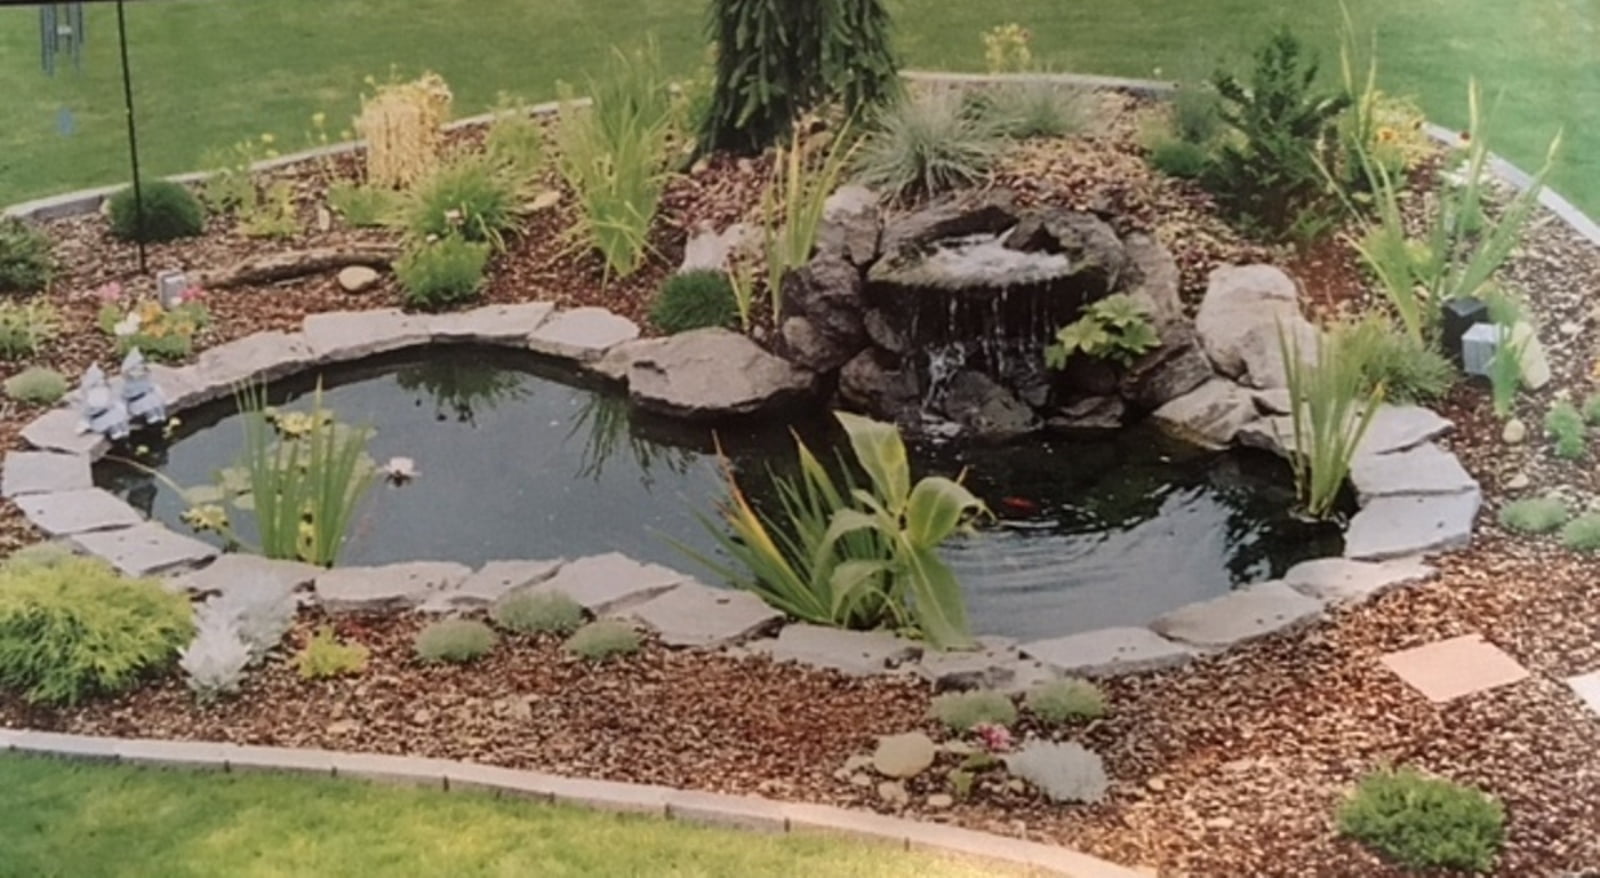 POND LINERS-12'x15' Liner for Koi Ponds & Water Gardens 